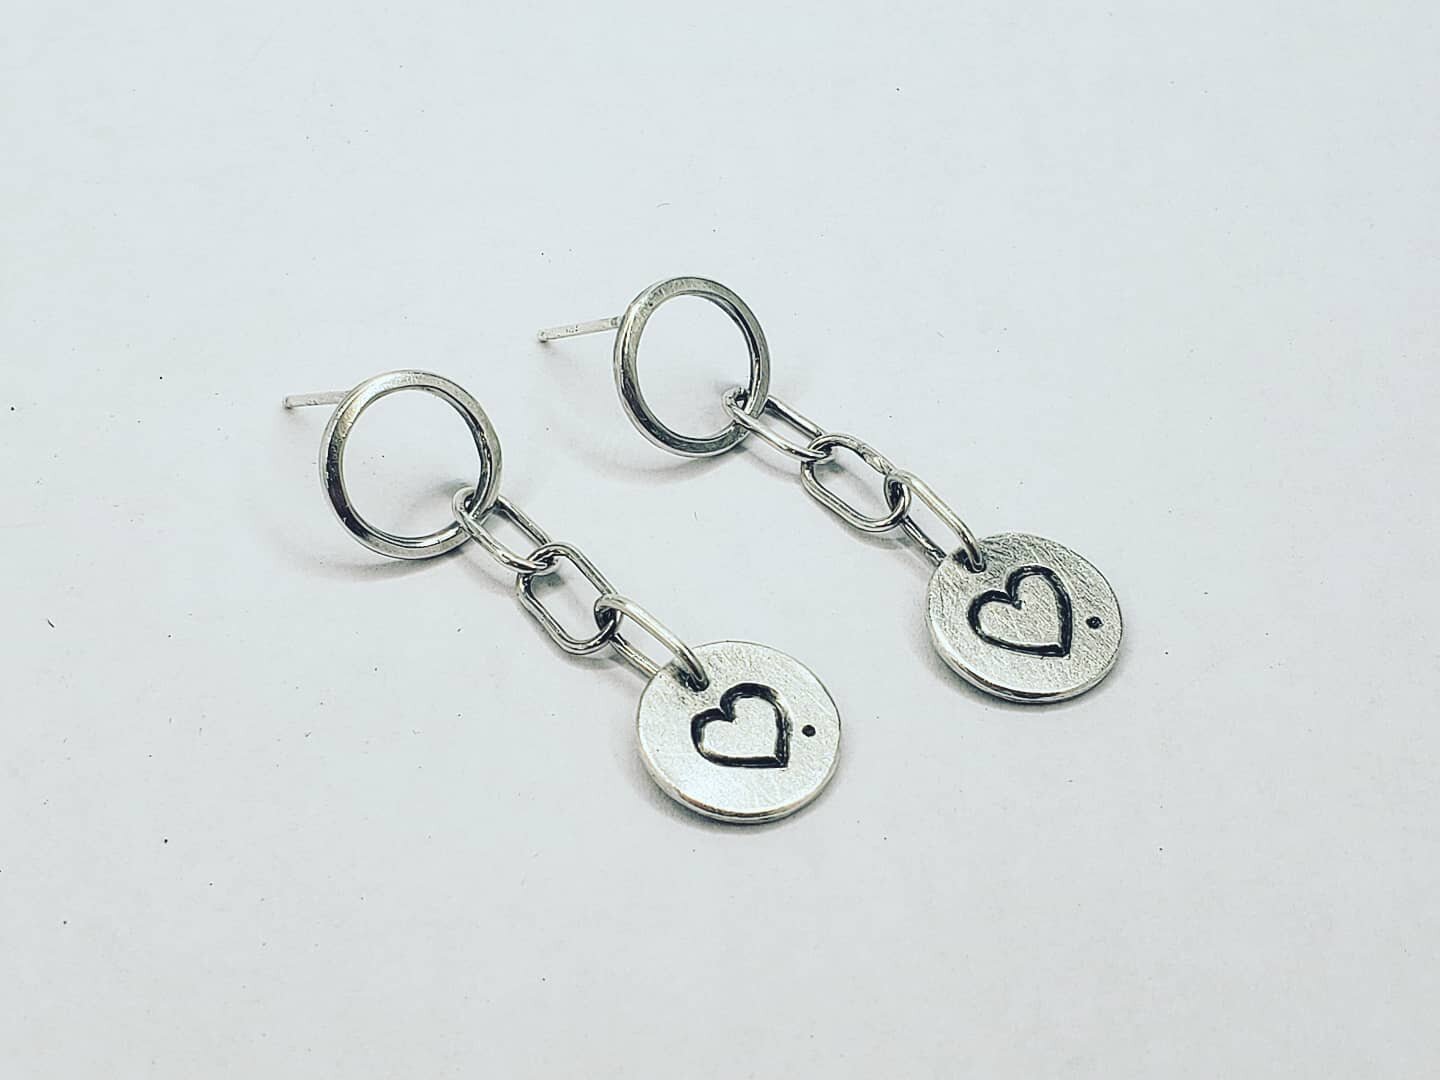 Fall in with a ball and chain.
Sterling silver earrings
#jewellery #jewelry #earrings
#hearts #ball #contemporaryjewellery #contemporaryjewelry #njrjeweller #chain #danglingearrings